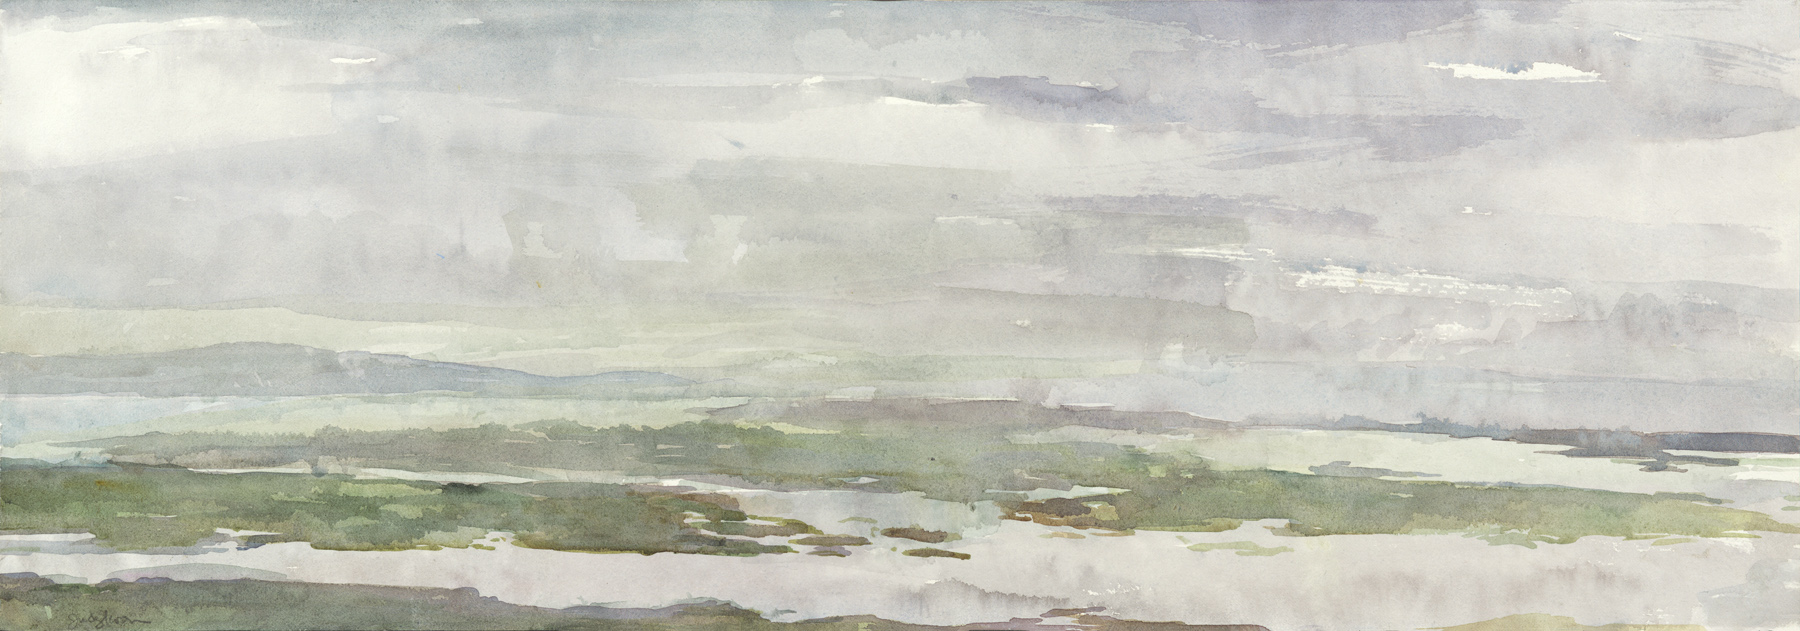   In Rain From Cleendra, Co Donegal,   2016, watercolor on paper, 30” x 10.5”   